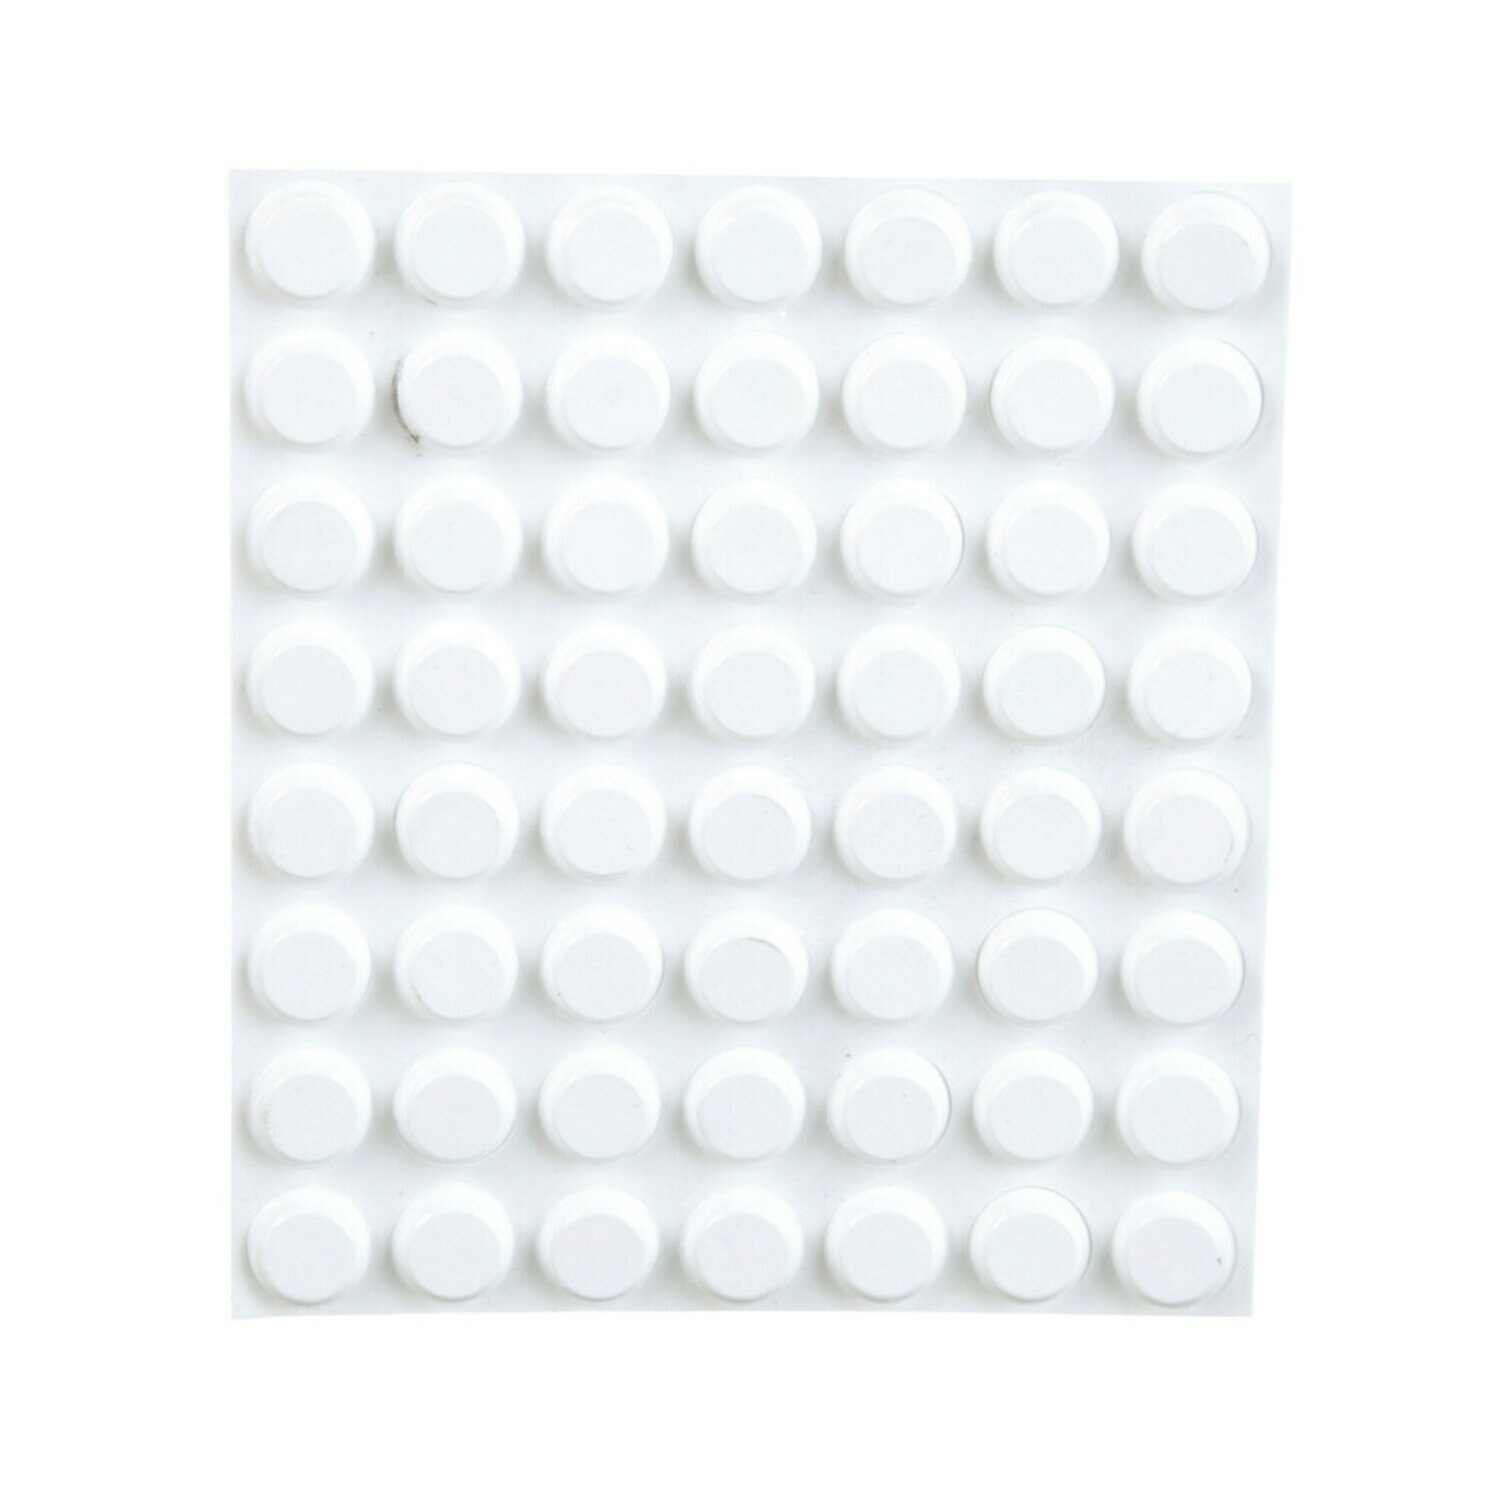 7000126186 - 3M Bumpon Protective Products SJ5412 White, 3000/Case